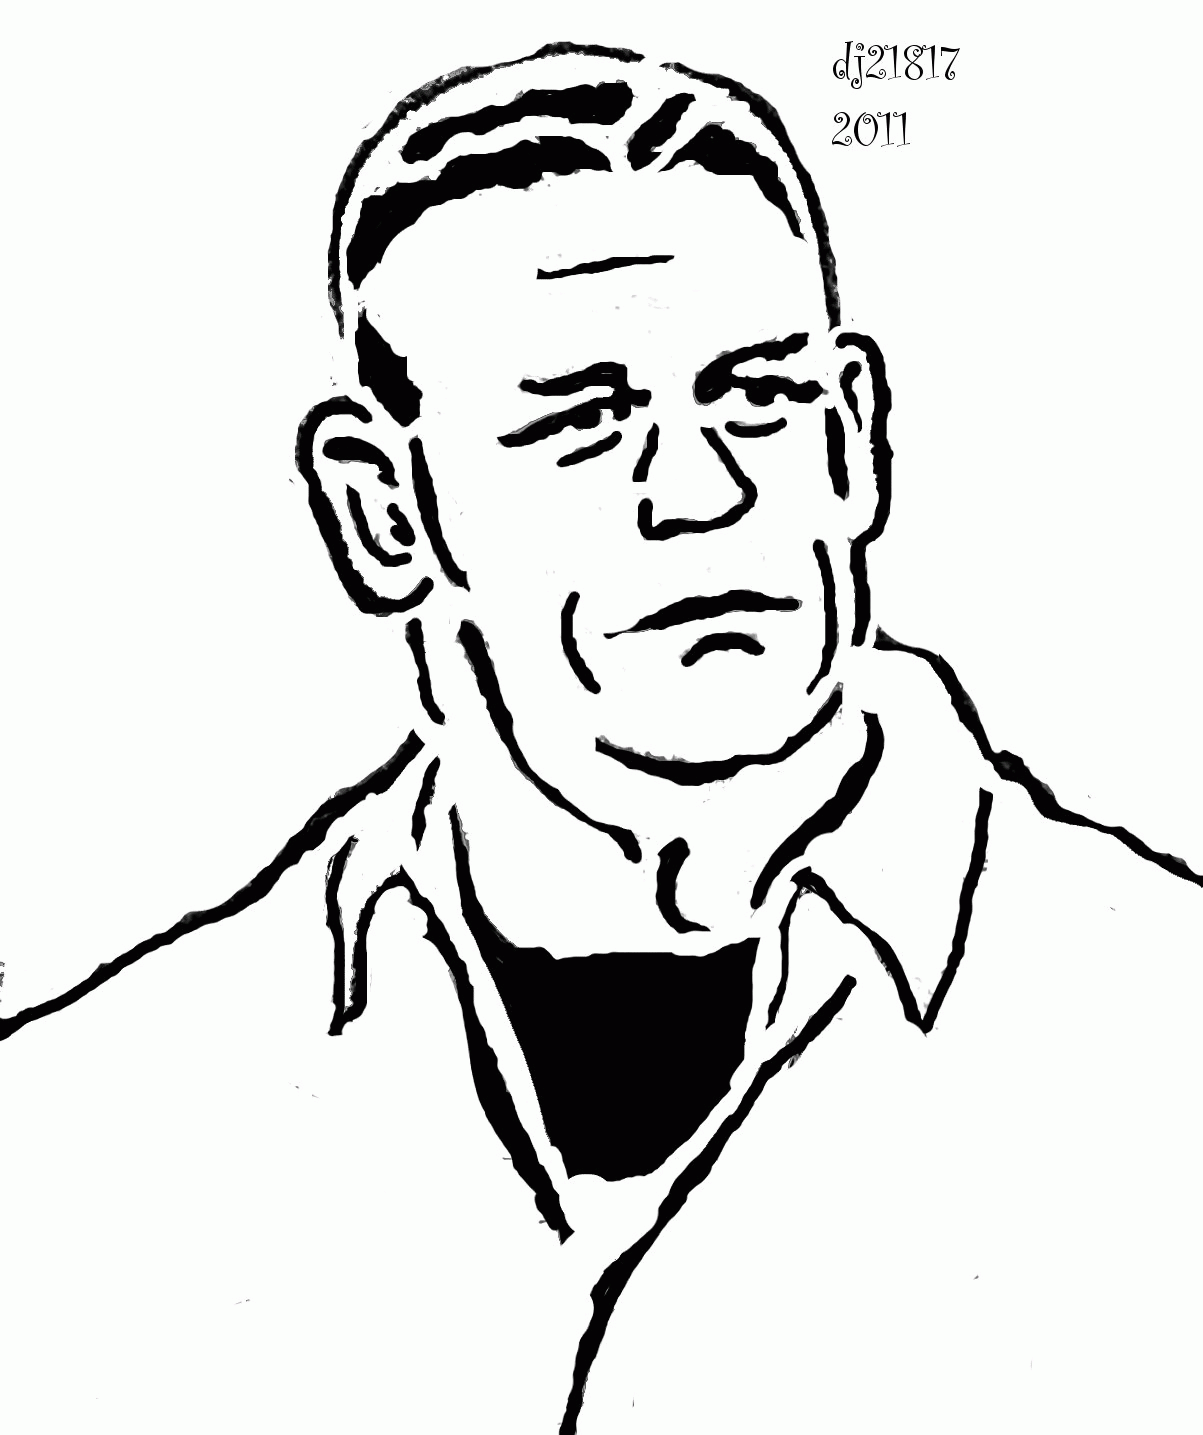 Free Wwe John Cena Coloring Pages Download Free Wwe John Cena Coloring Pages Png Images Free